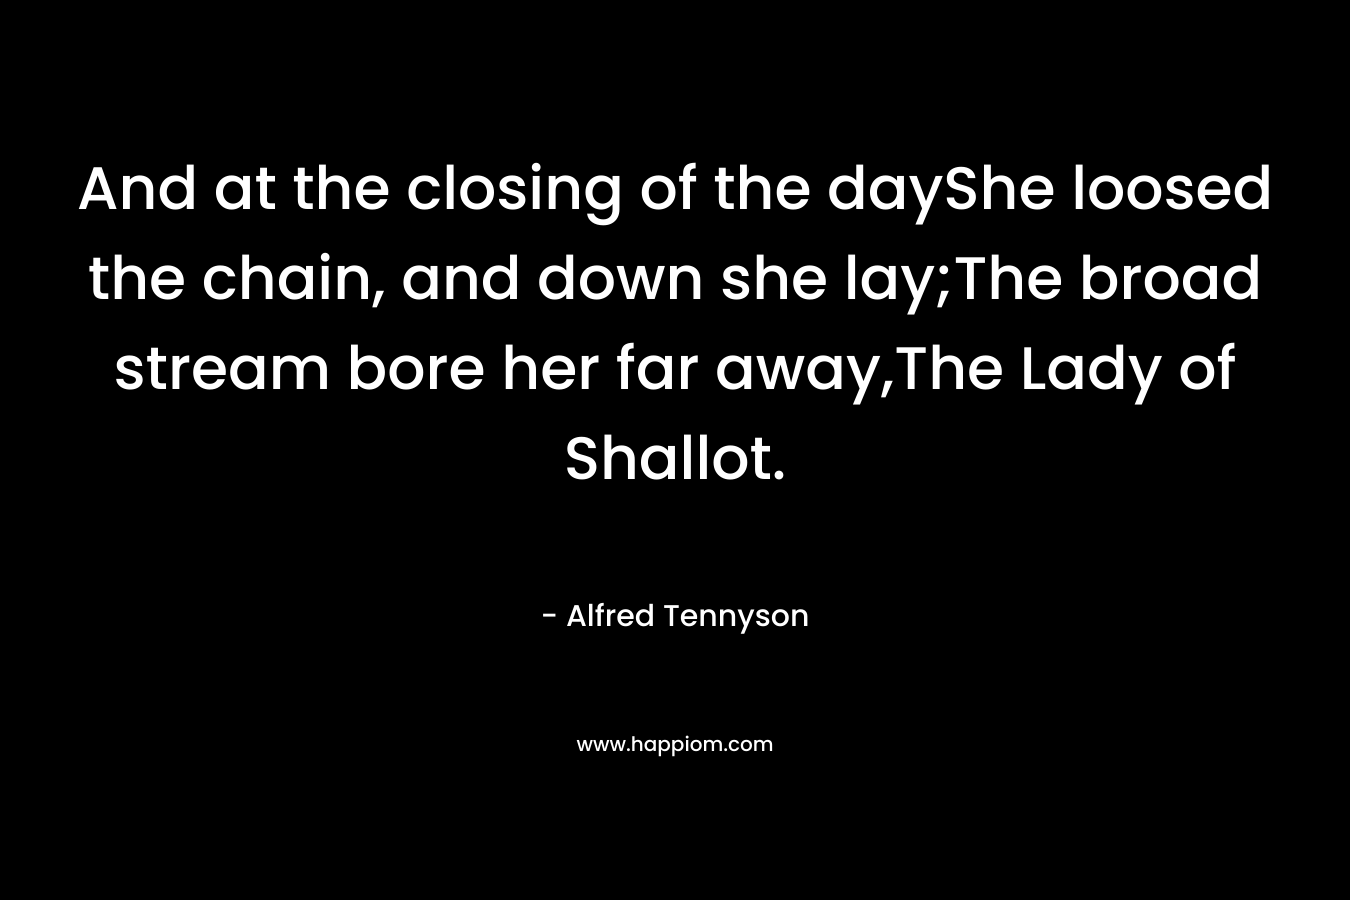 And at the closing of the dayShe loosed the chain, and down she lay;The broad stream bore her far away,The Lady of Shallot.